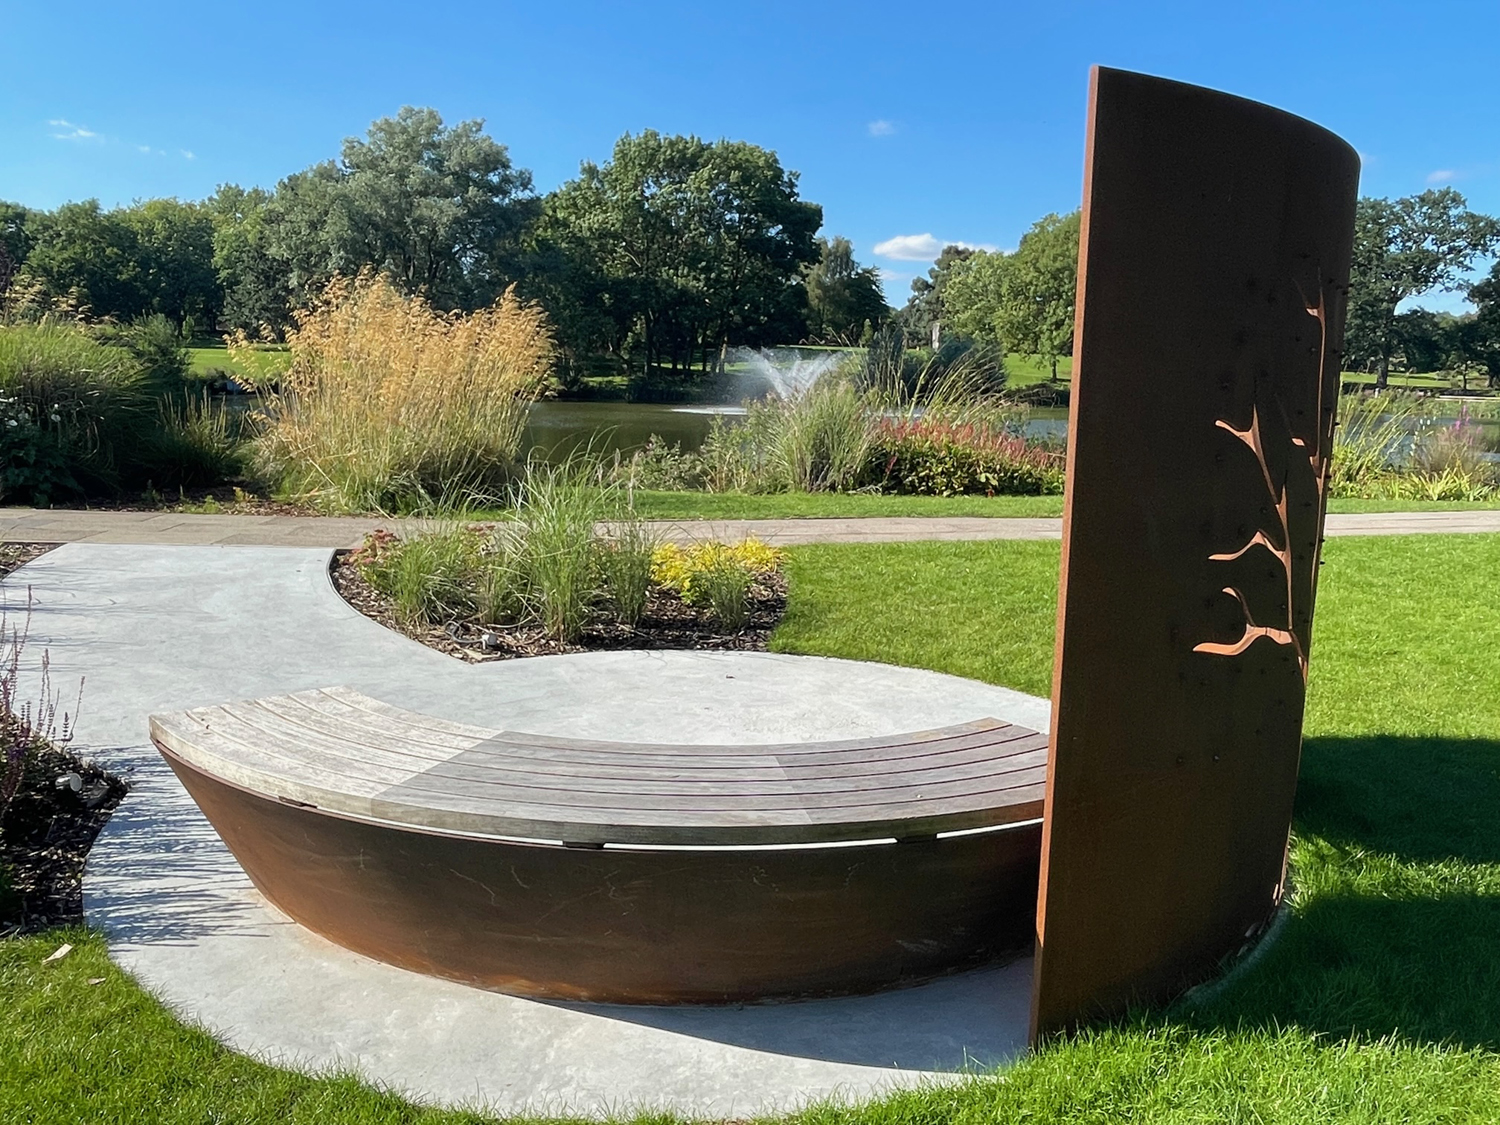 Our Tree of Life memorial in the sunshine. A curved bench and tree cut from a metal wall by the lake.